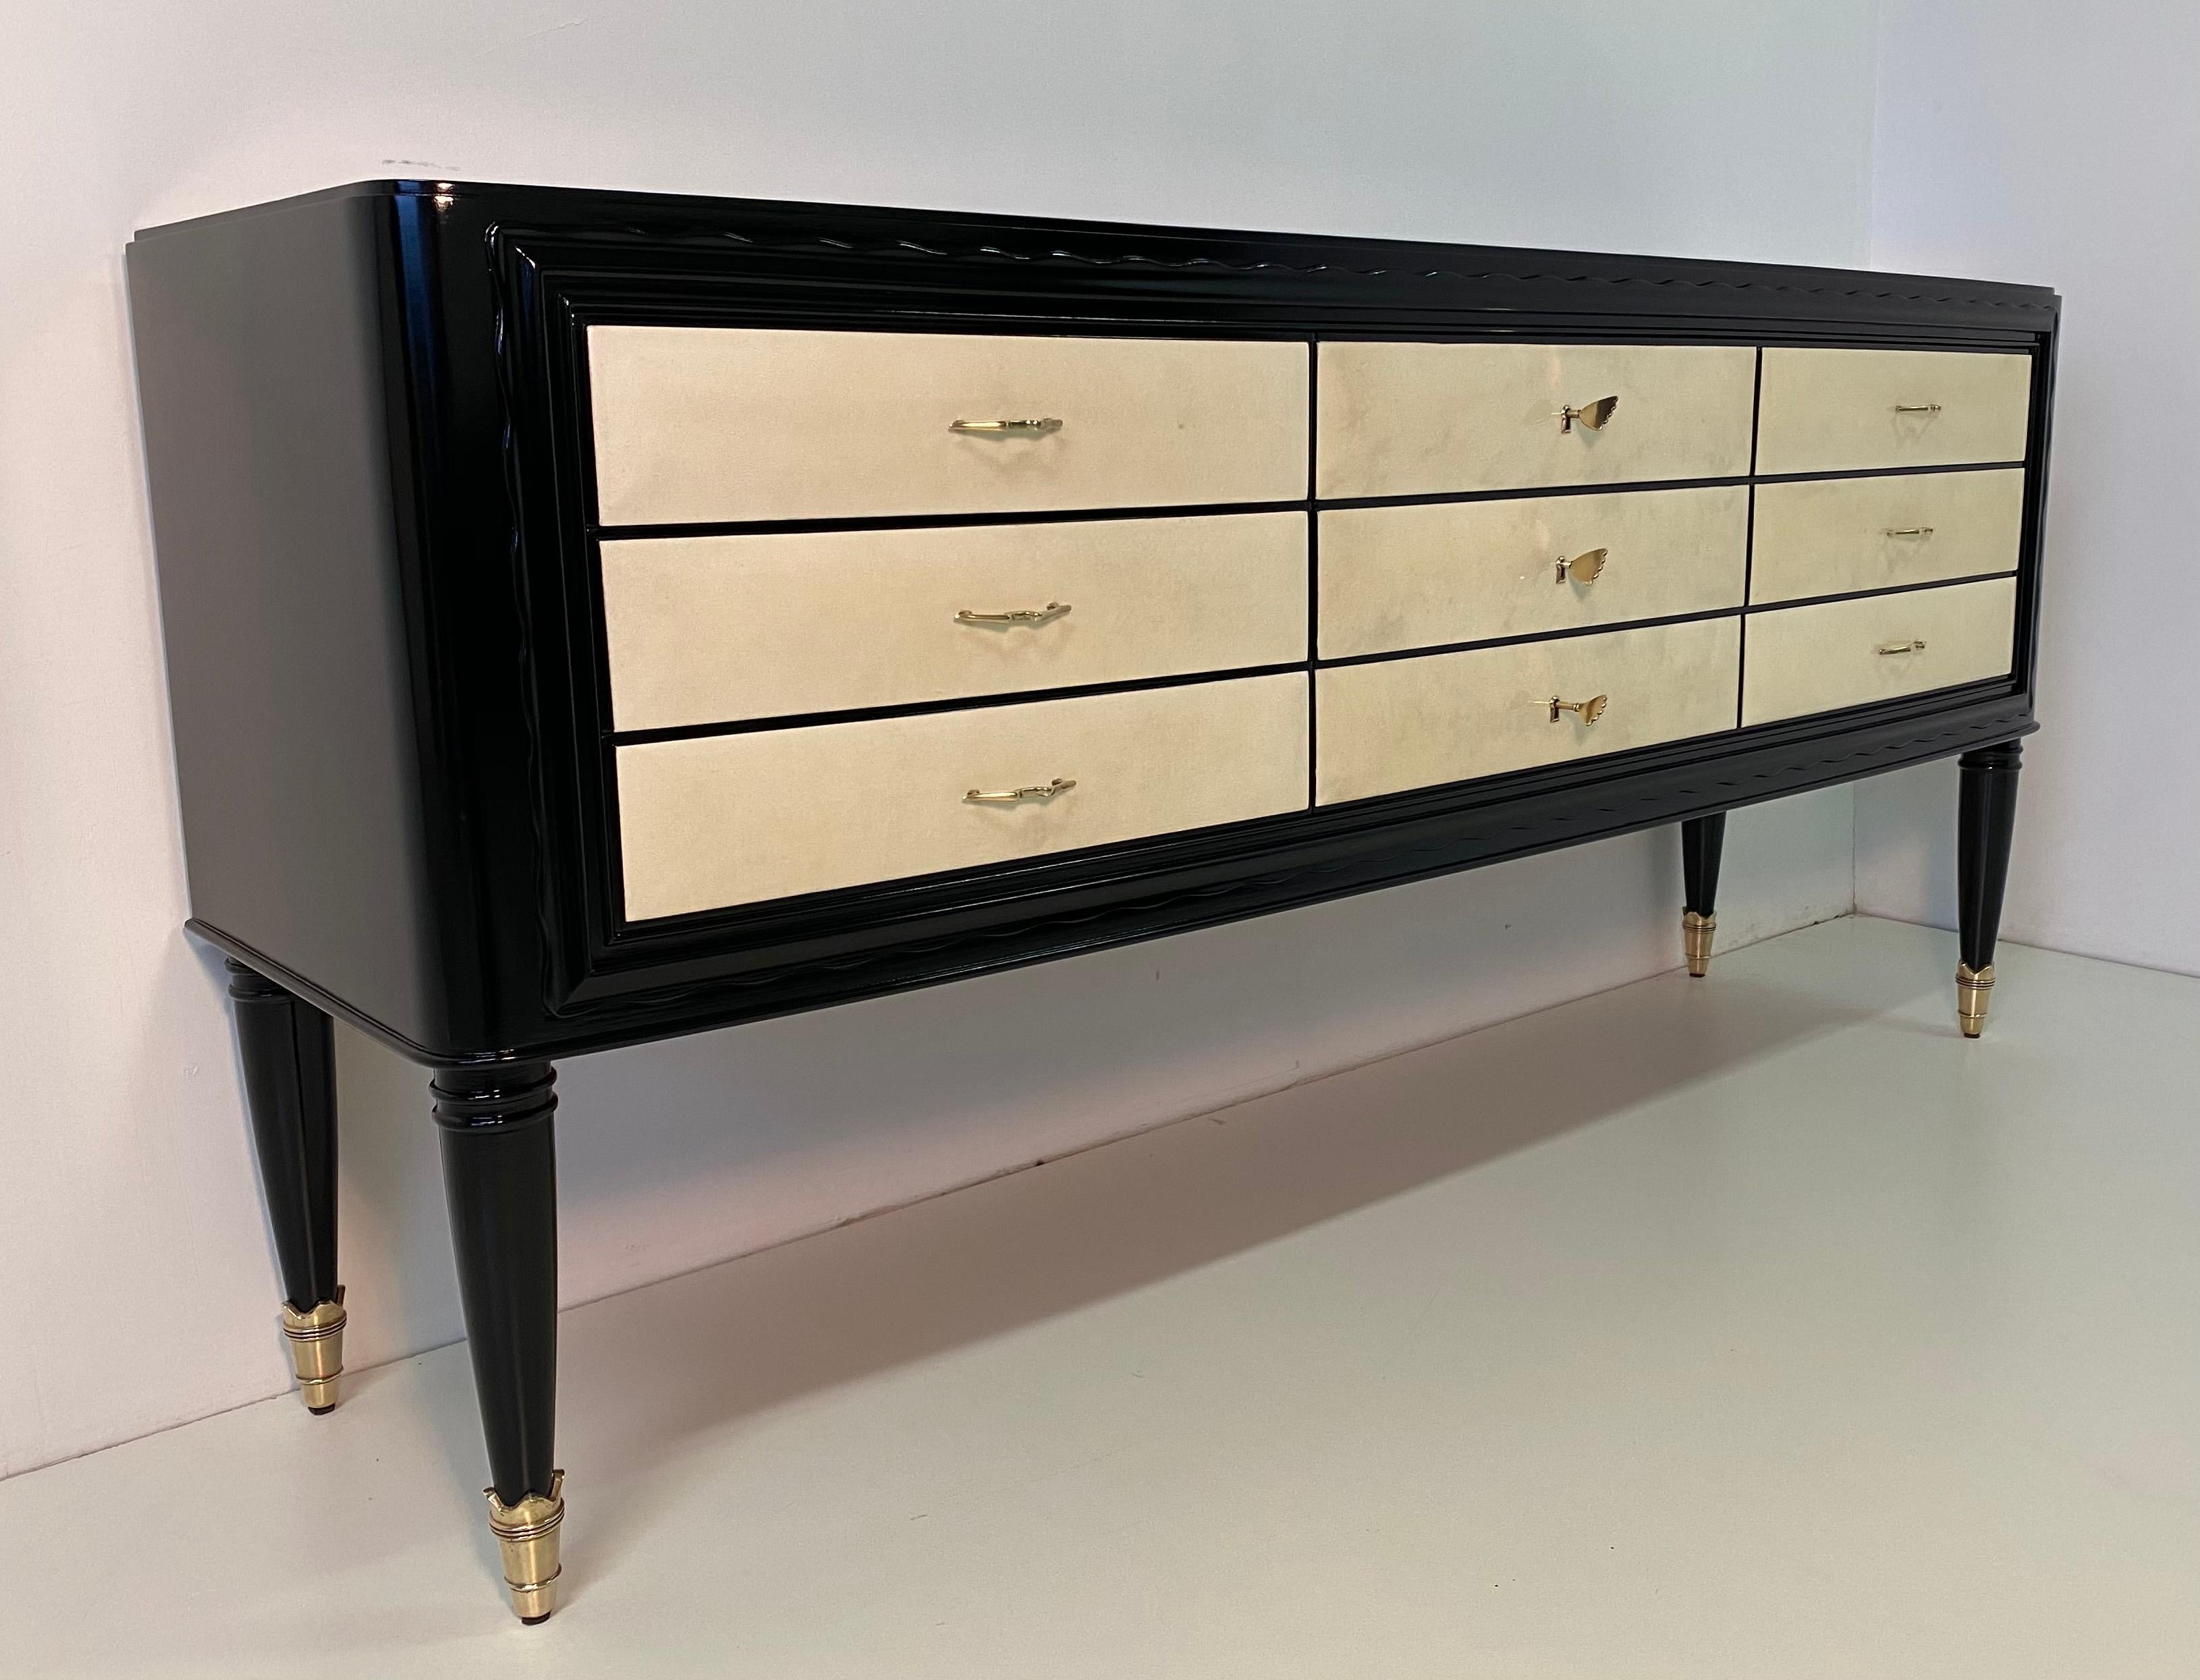 This chest of drawers was produced in Italy in the 1940s and is attributable to the design of Paolo Buffa.
The structure is black lacquered while the drawers are covered with a precious parchment.
The details and the handles are in brass.
Completely